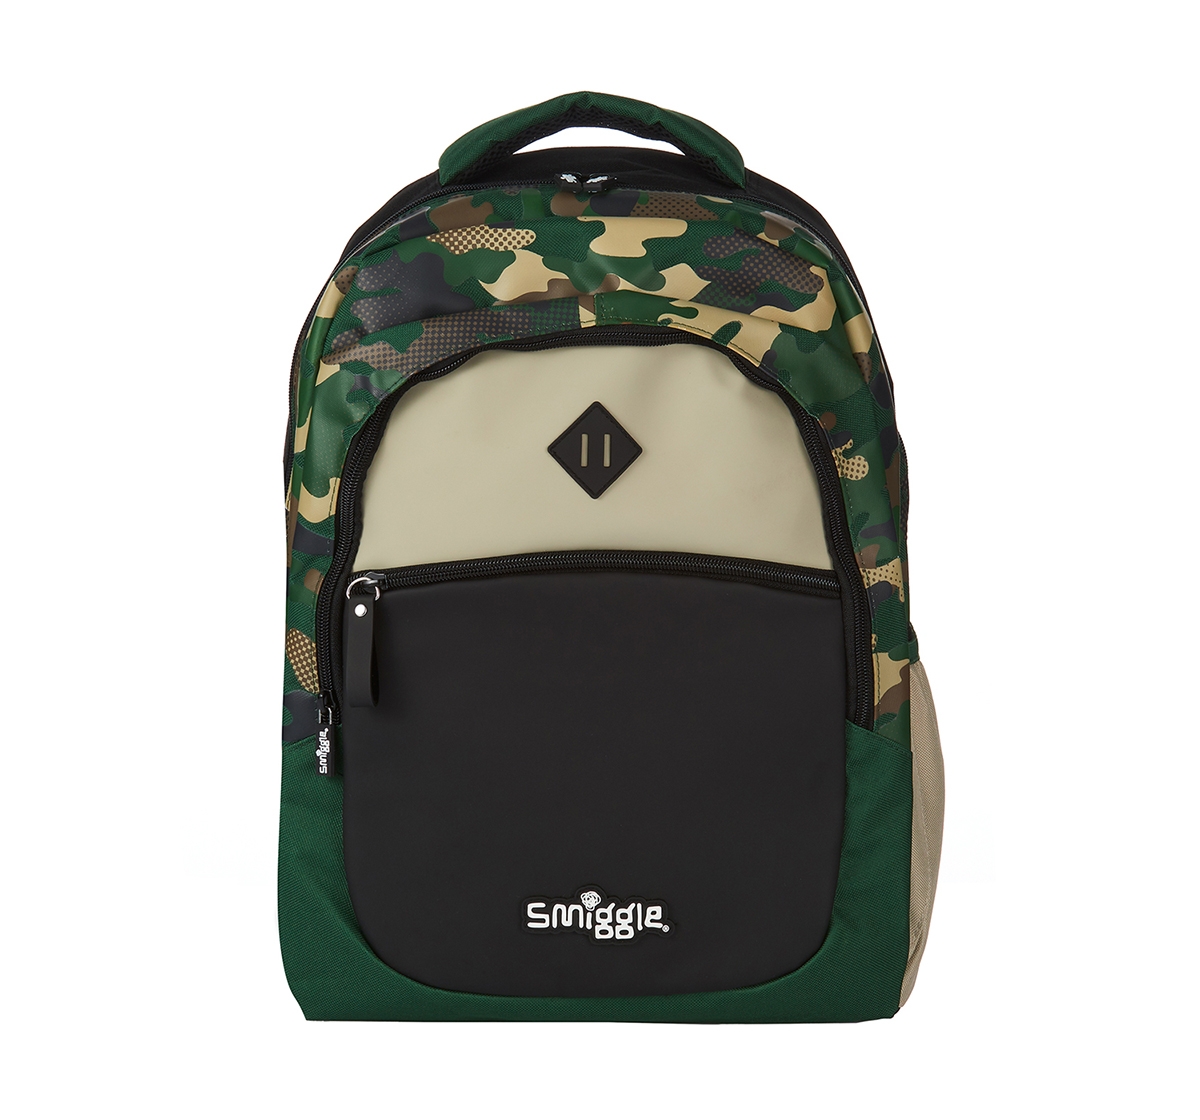 Smiggle | Smiggle Block Backpack - Camouflage Print Bags for Kids age 3Y+ (Khaki)